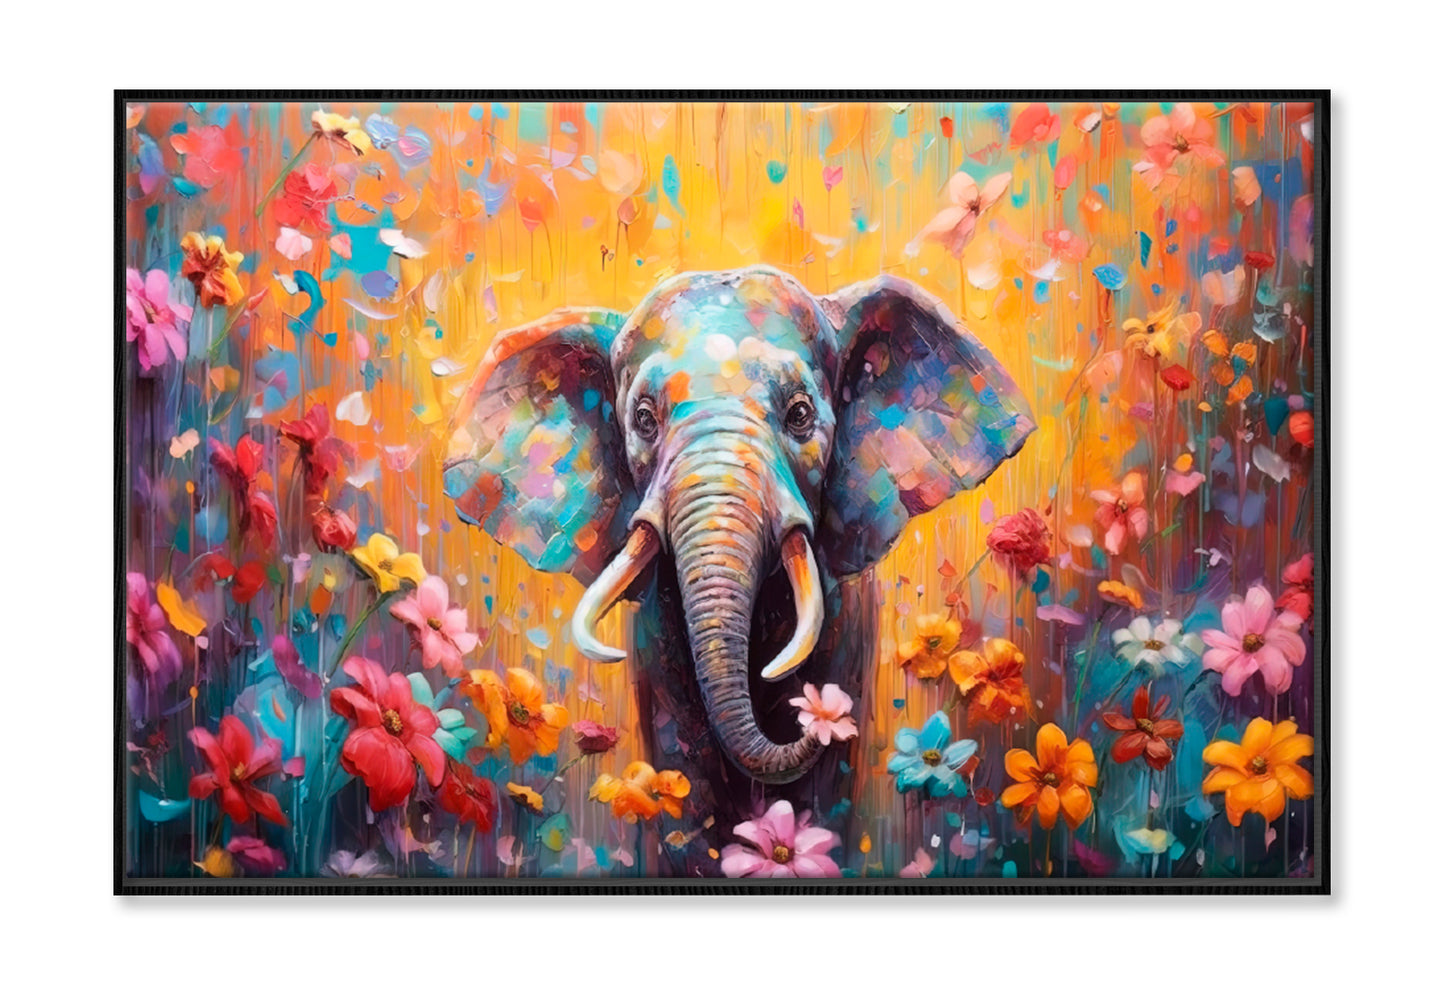 Elephant In Flower Blossom Paint Limited Edition High Quality Print Canvas Box Framed Black